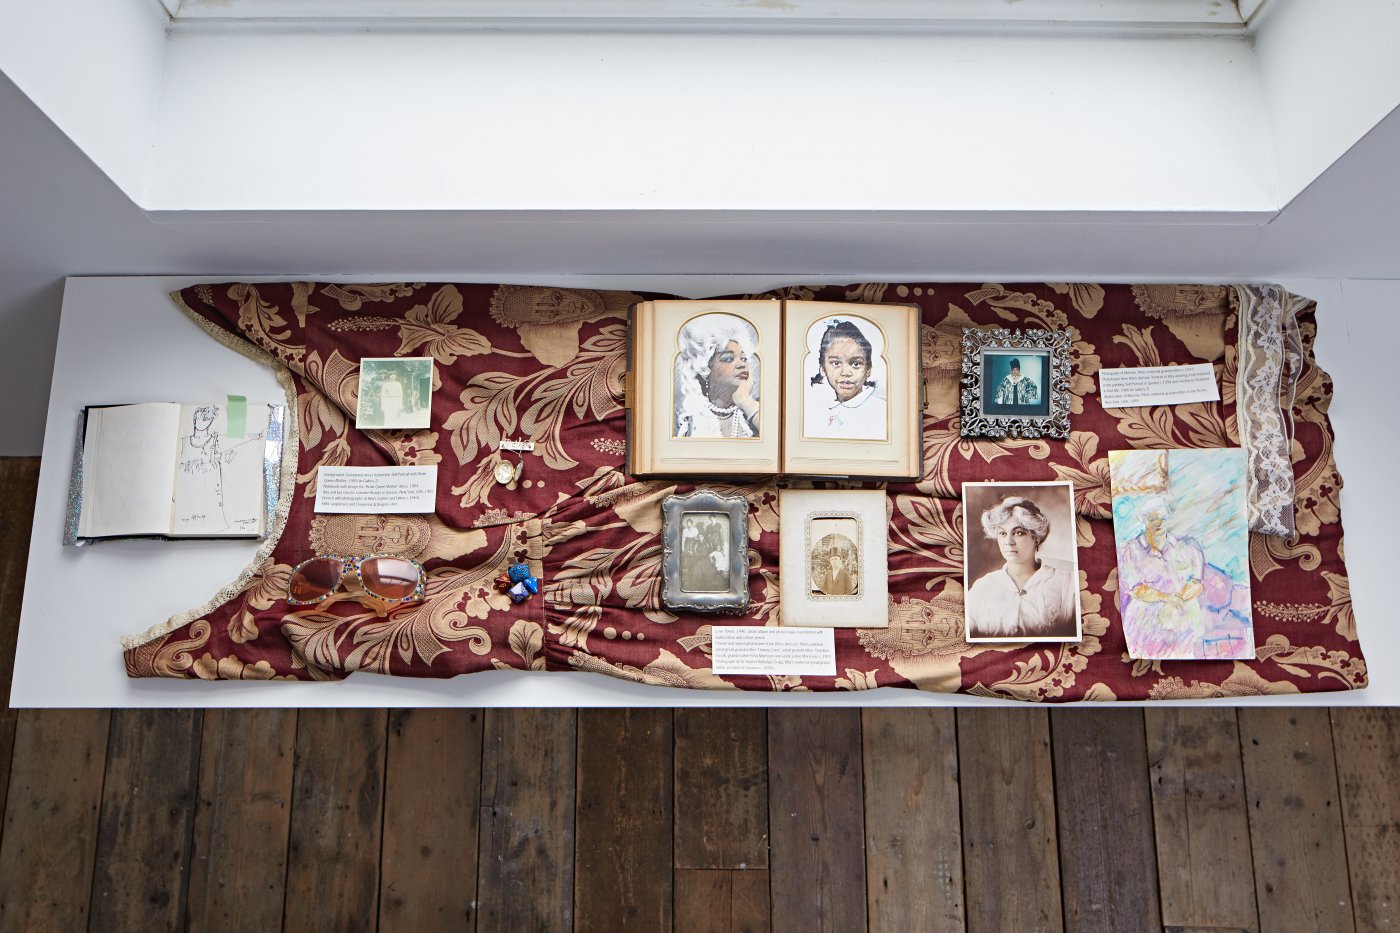 Installation image for Rita Keegan: Somewhere Between There and Here, at South London Gallery